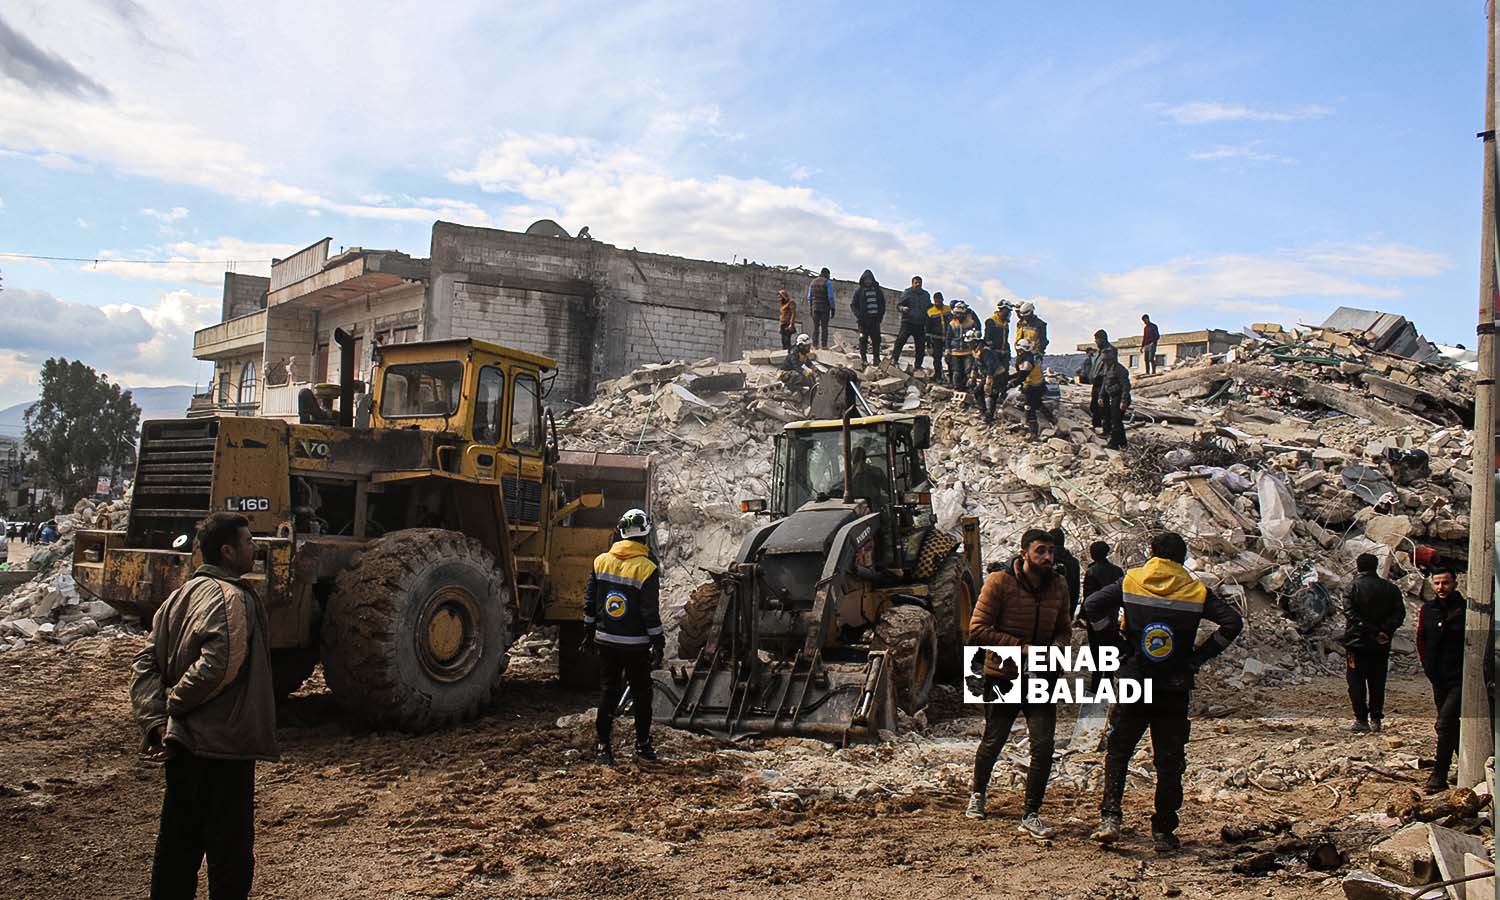 Volunteers from the Syria Civil Defense (SCD) teams try to rescue and recover victims from under the rubble in Armanaz town following the earthquake that hit the northwestern Syrian region - February 7, 2023 (Enab Baladi/Iyad Abdul Jawad)
